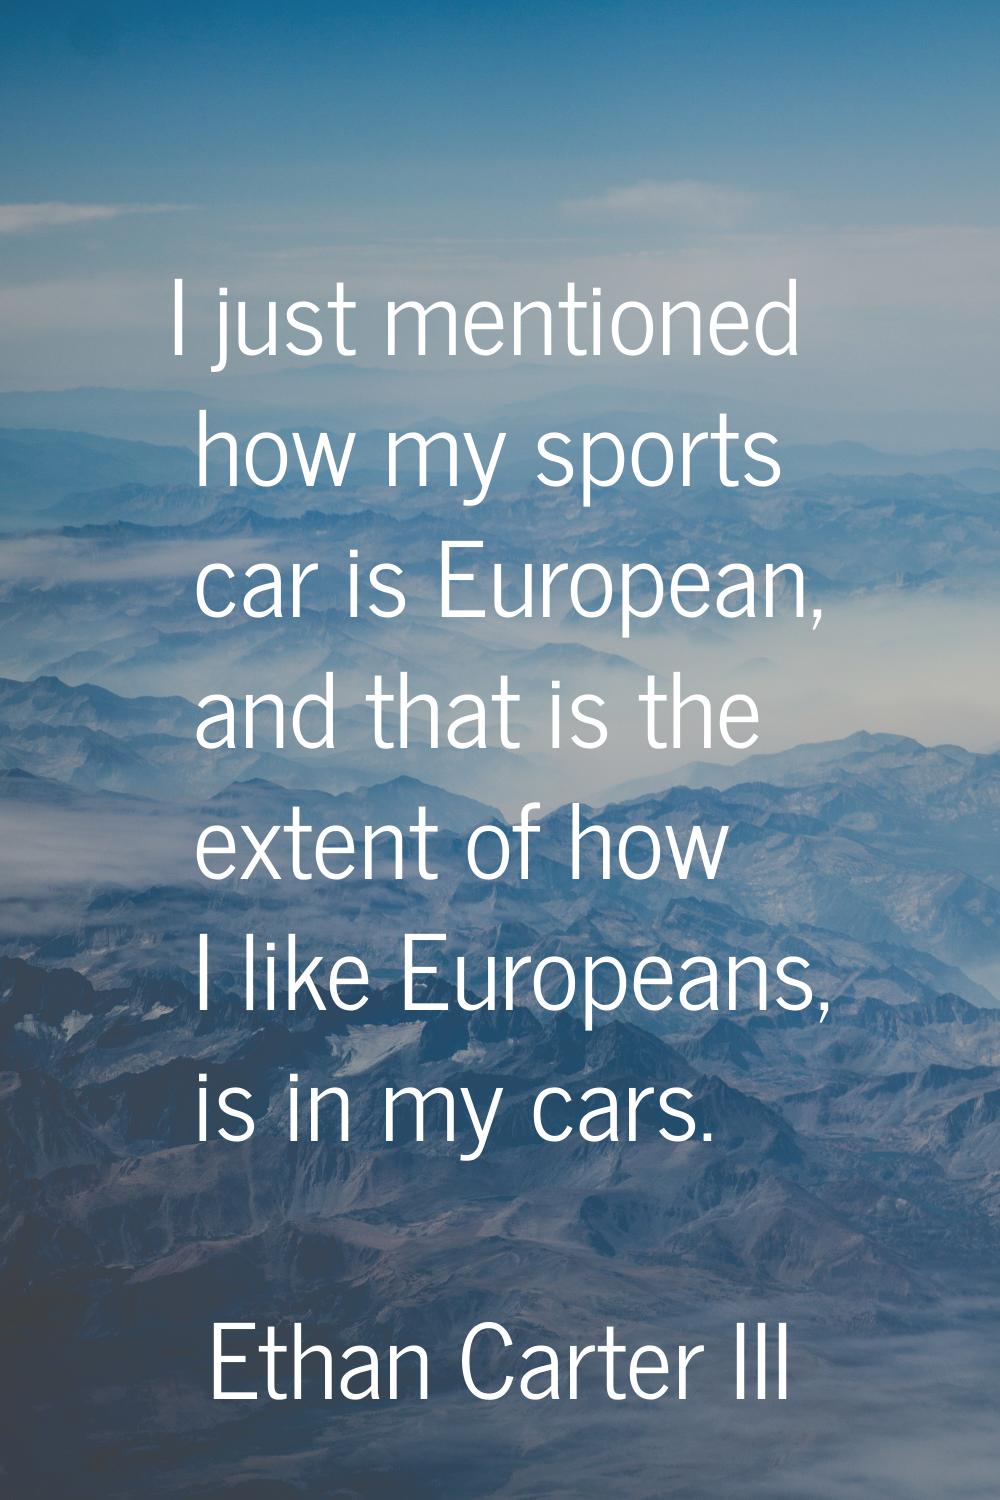 I just mentioned how my sports car is European, and that is the extent of how I like Europeans, is 